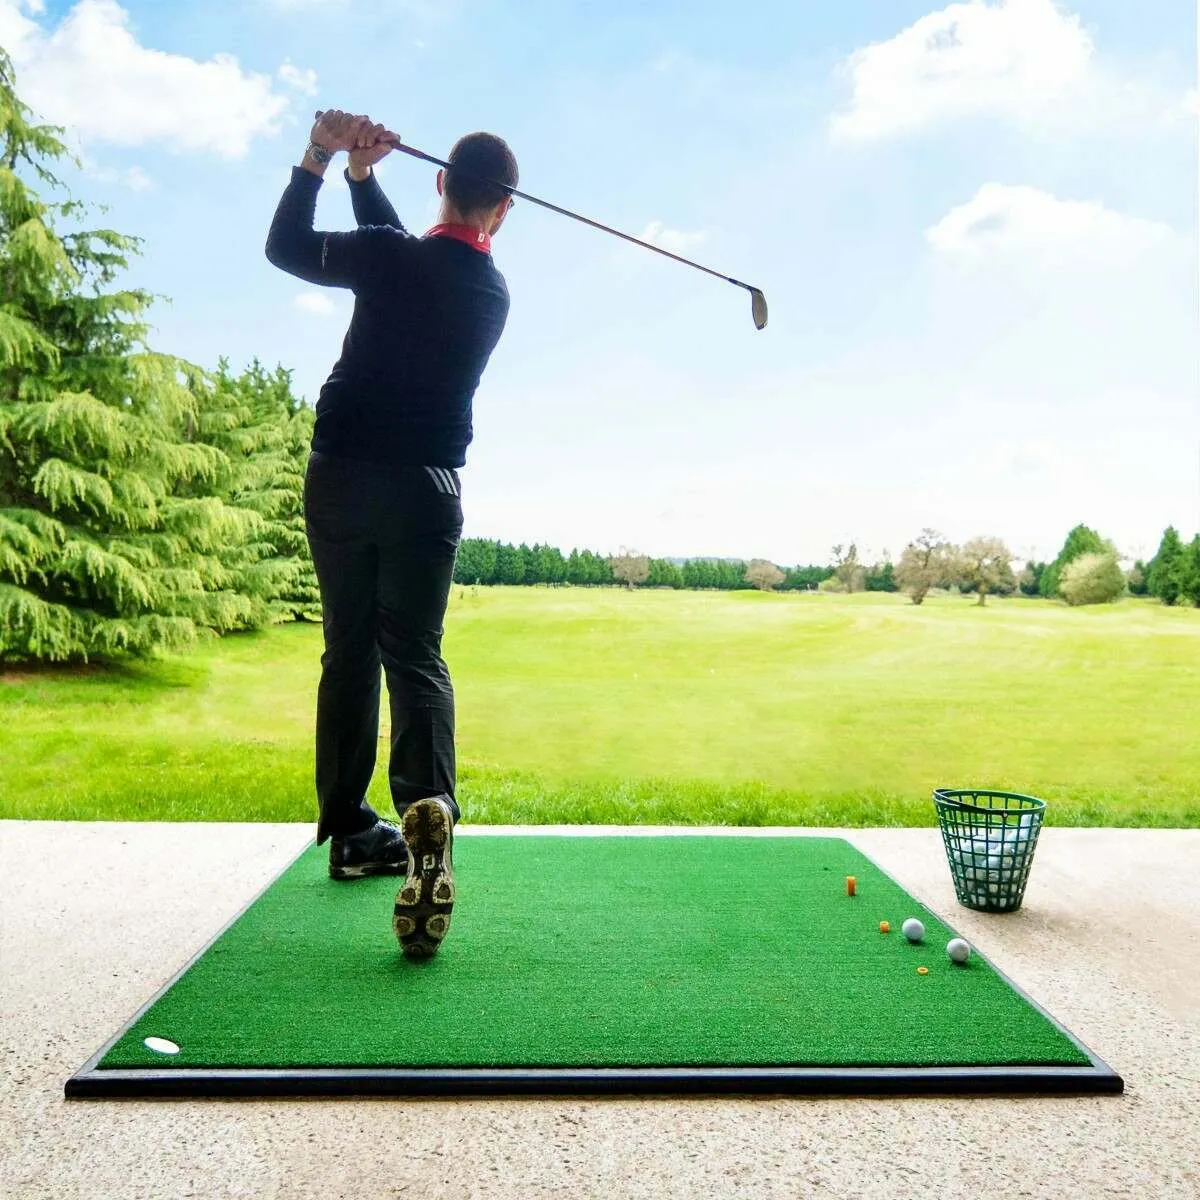 The Power of Practice: Why Consistency and Repetition are Key to Improving Your Golf Game